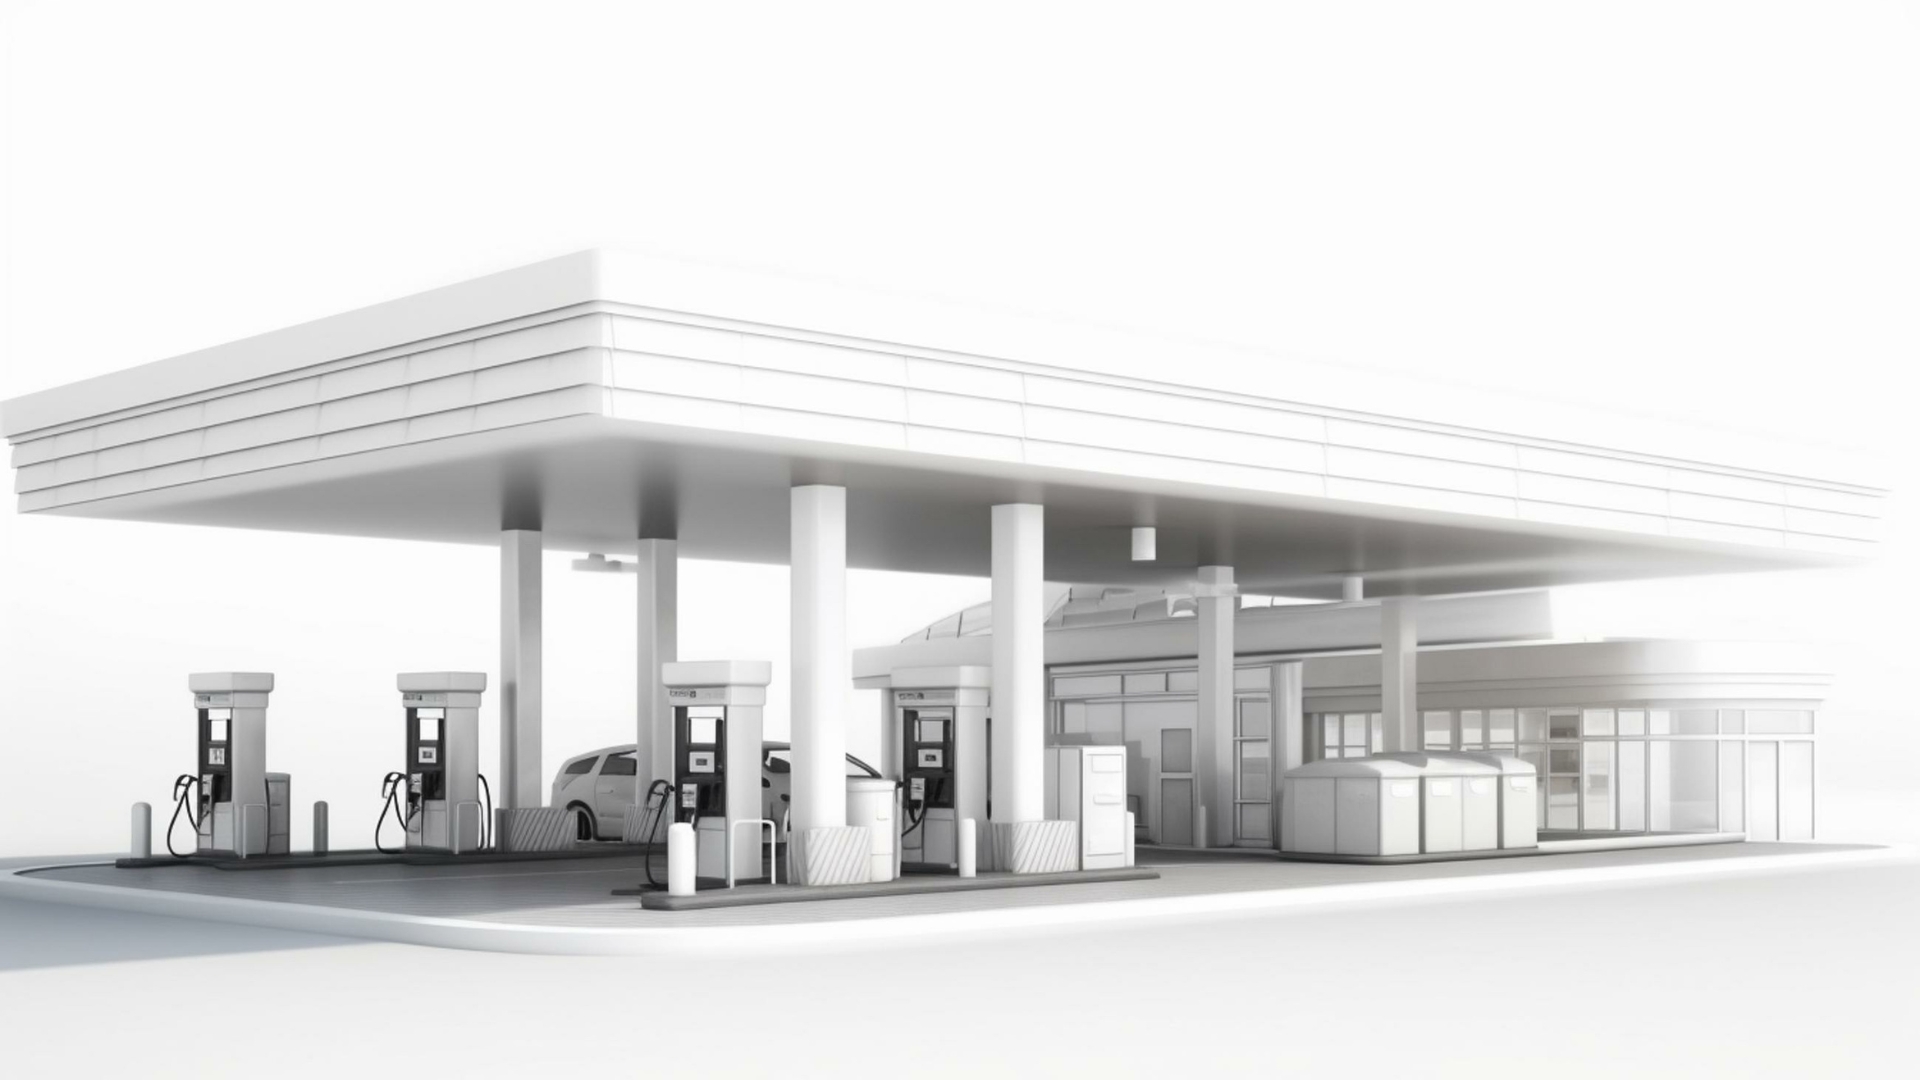 A gas station with cars